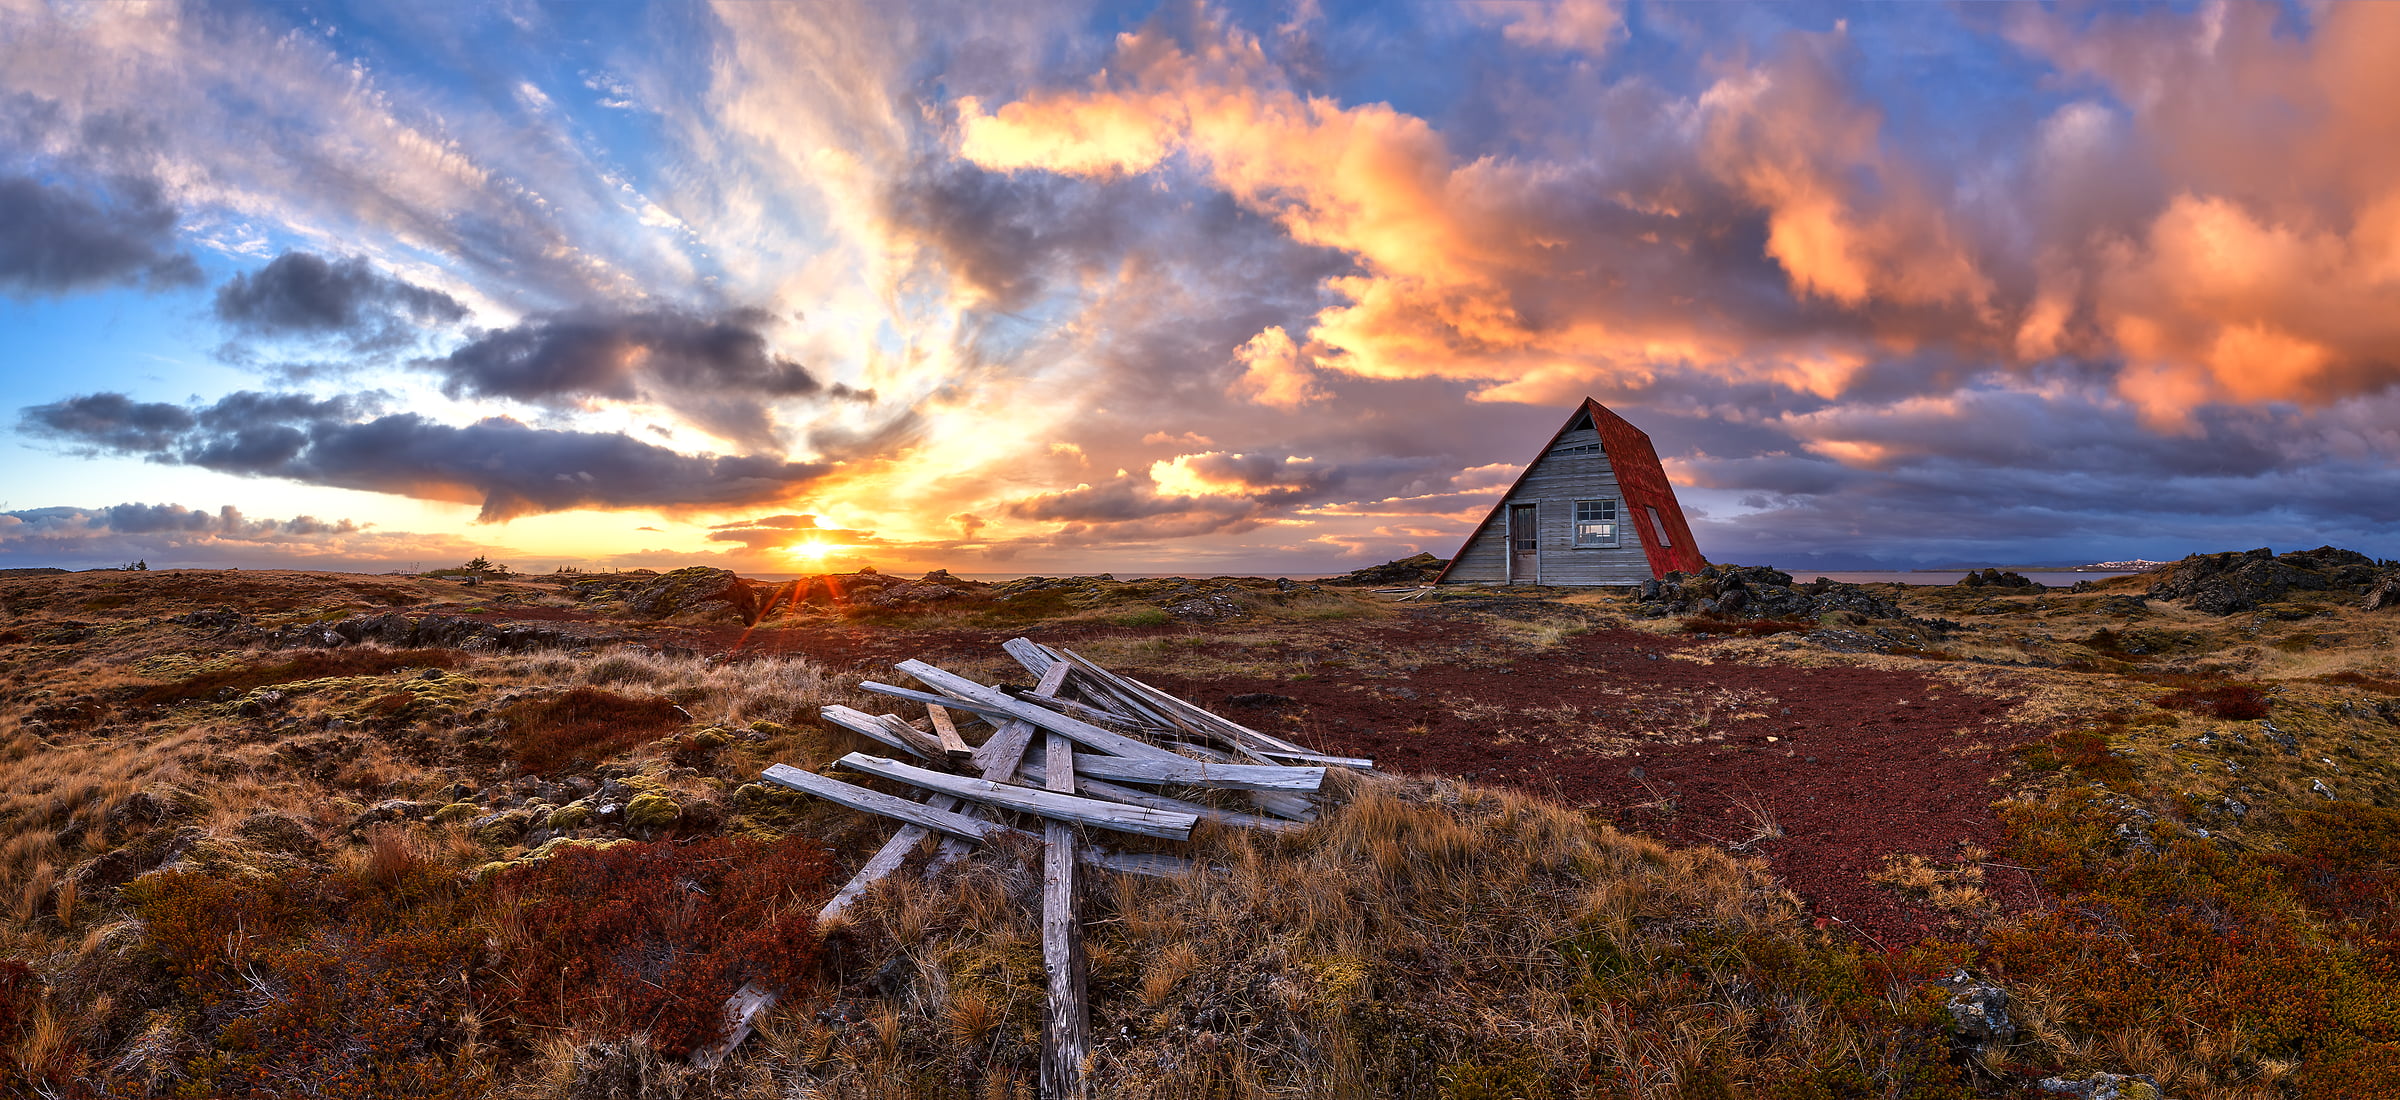 73 megapixels! A very high resolution, large-format VAST photo of an A-frame house in Iceland; fine art landscape photo created at sunset by Scott Dimond on the Great Plains in the Capital Region of Iceland